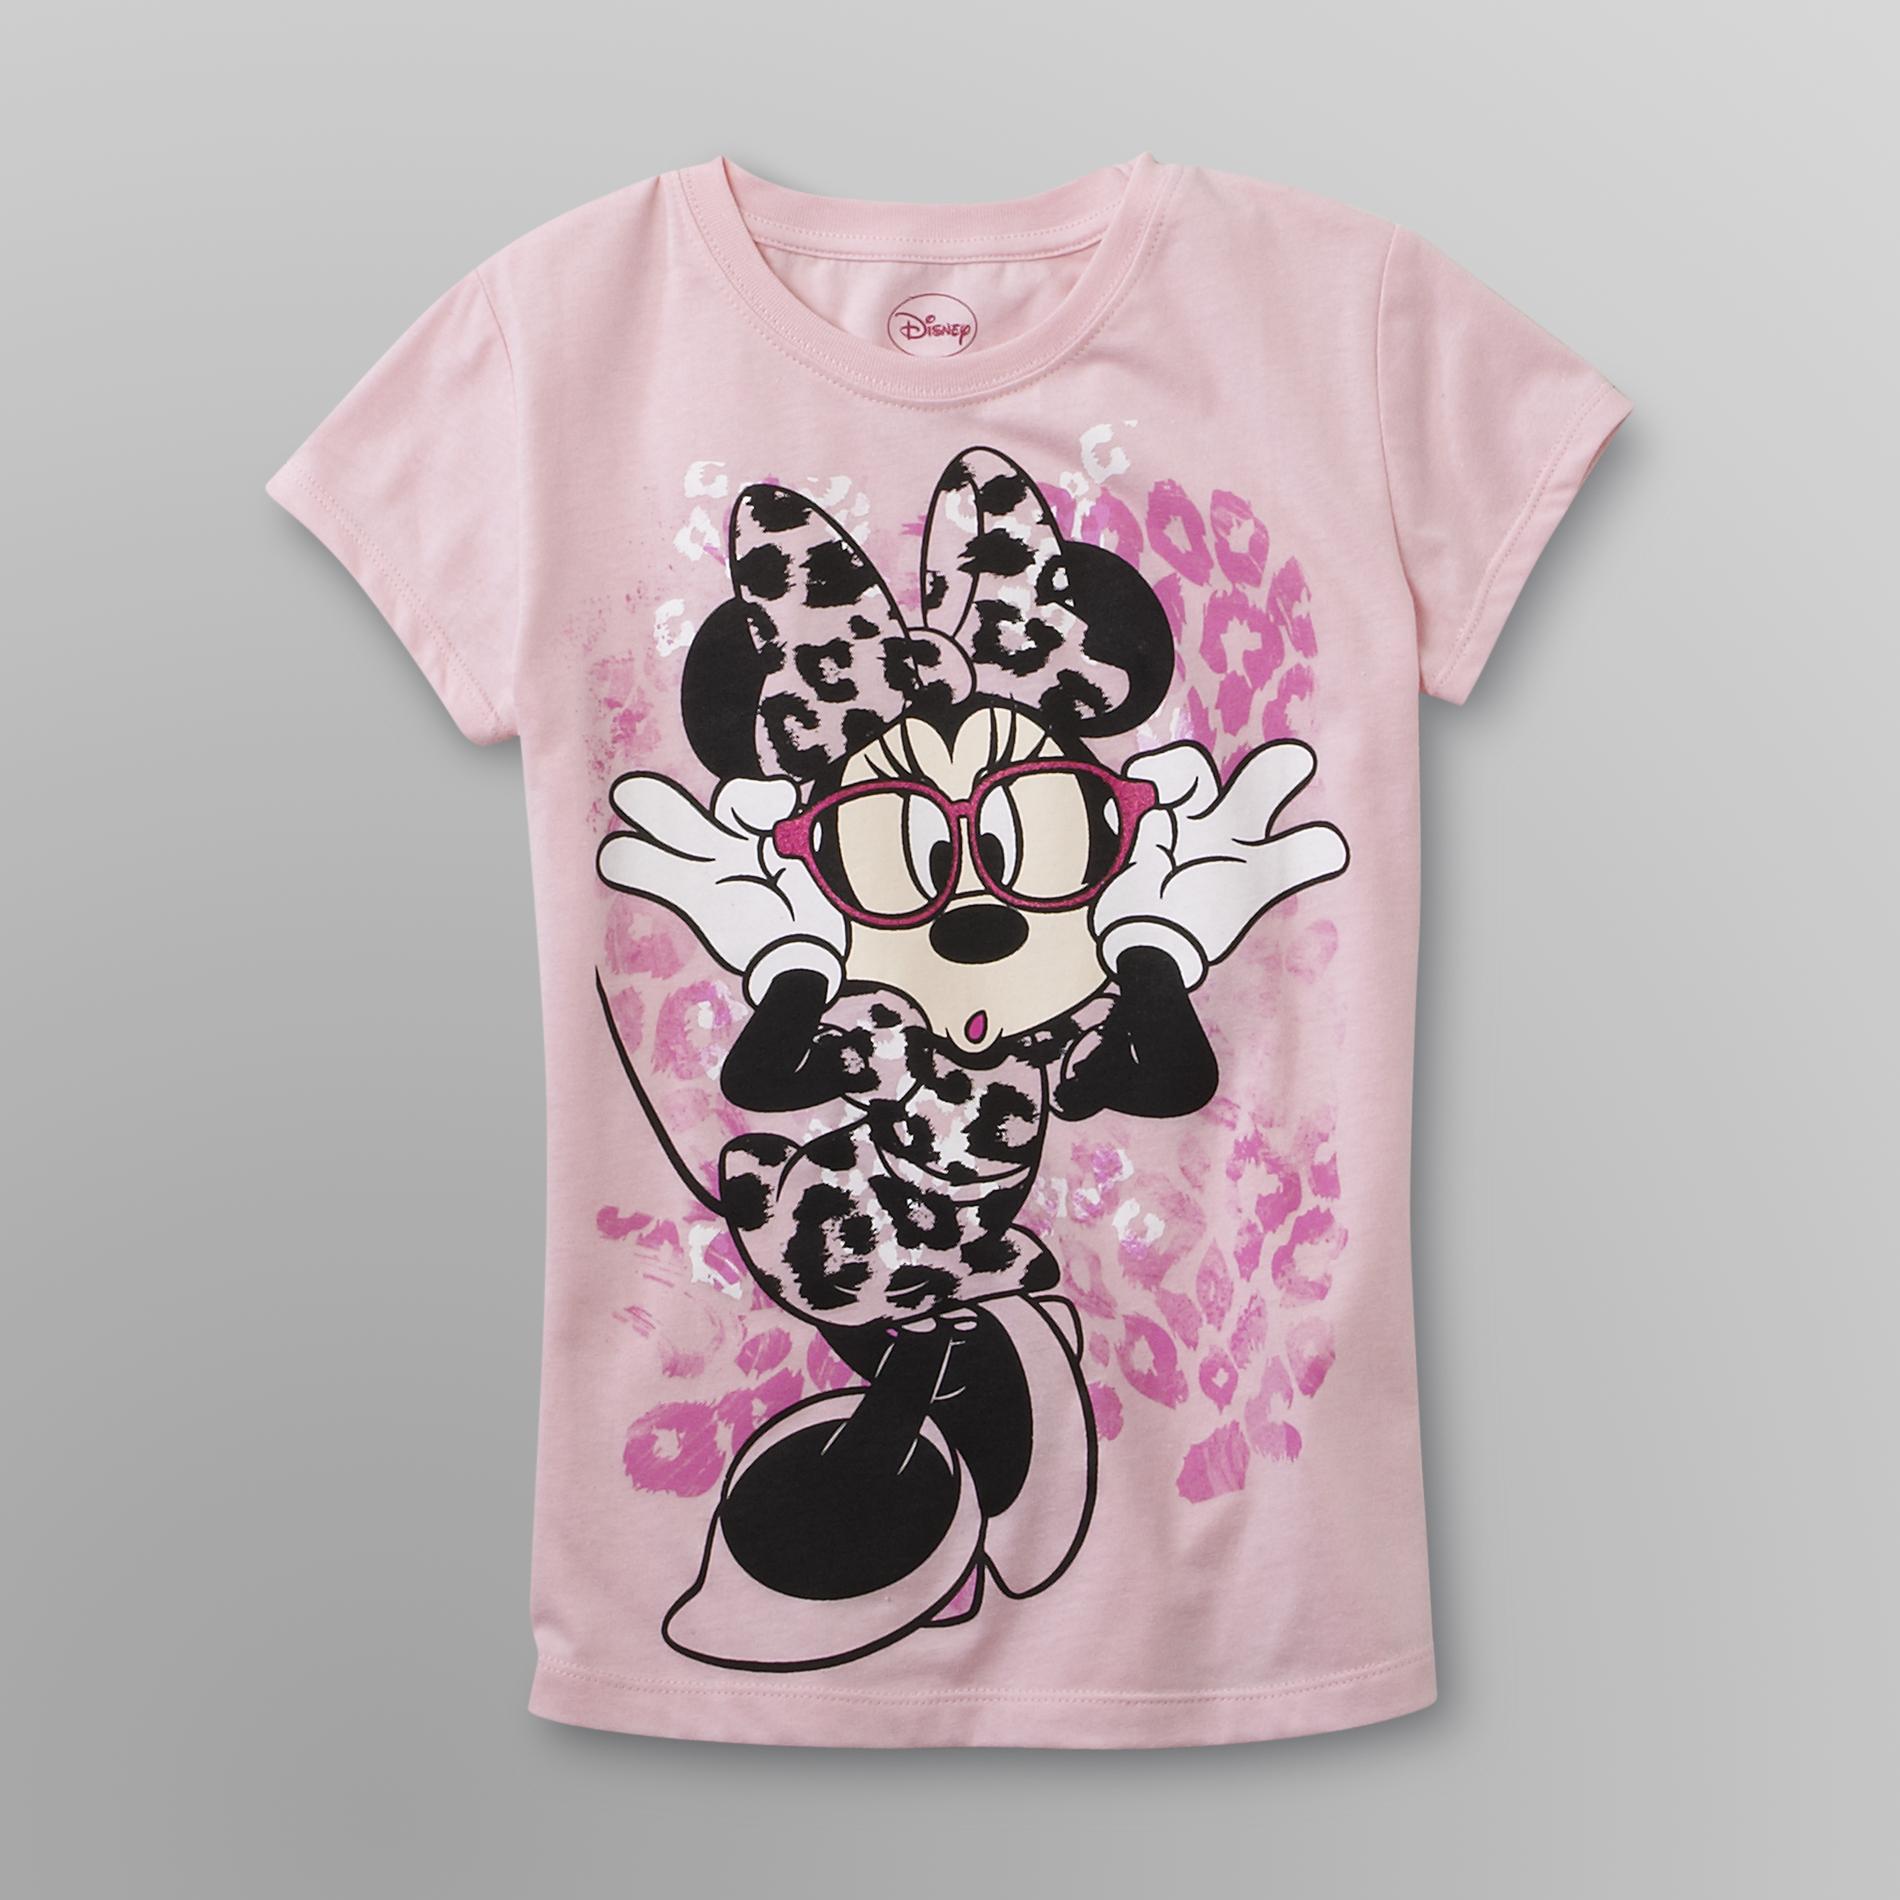 Disney Minnie Mouse Girl's Graphic T-Shirt - Glasses